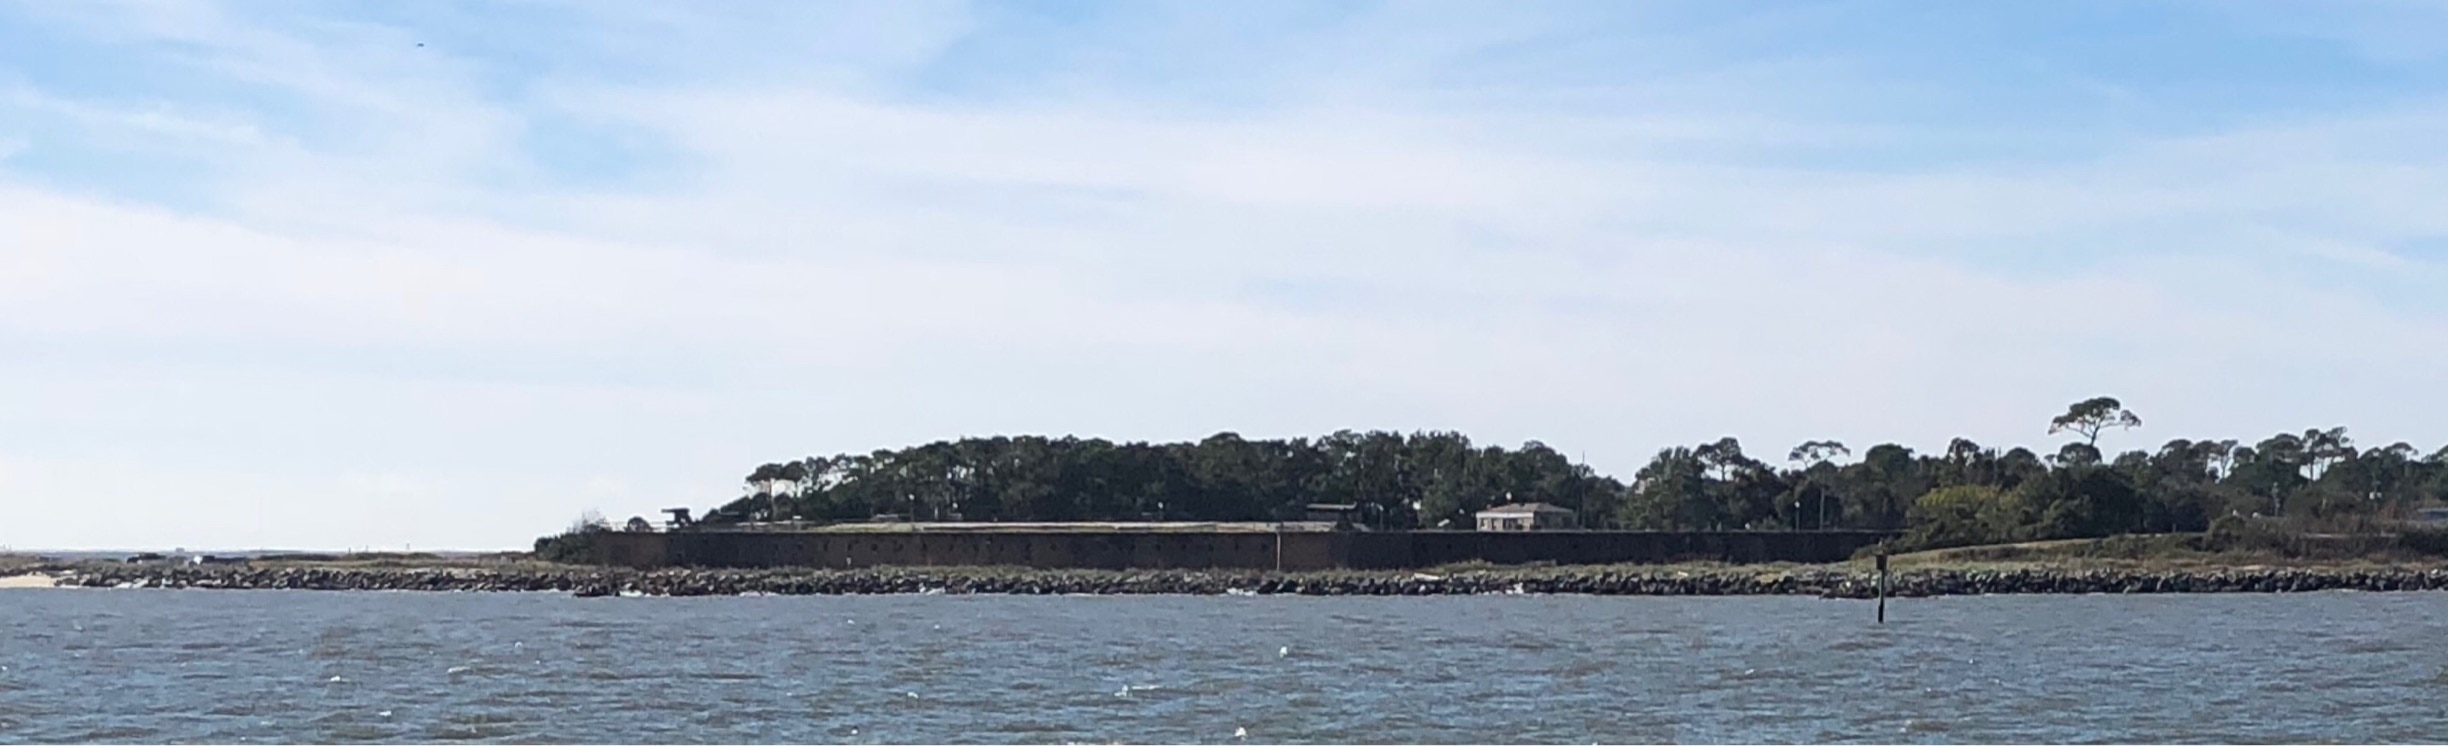 One of two Civil War forts guarding the entrance to Mobile Bay. This one is actually on the list of the the 10 most ‘endangered’ Civil War sites because of ongoing erosion caused by storms.